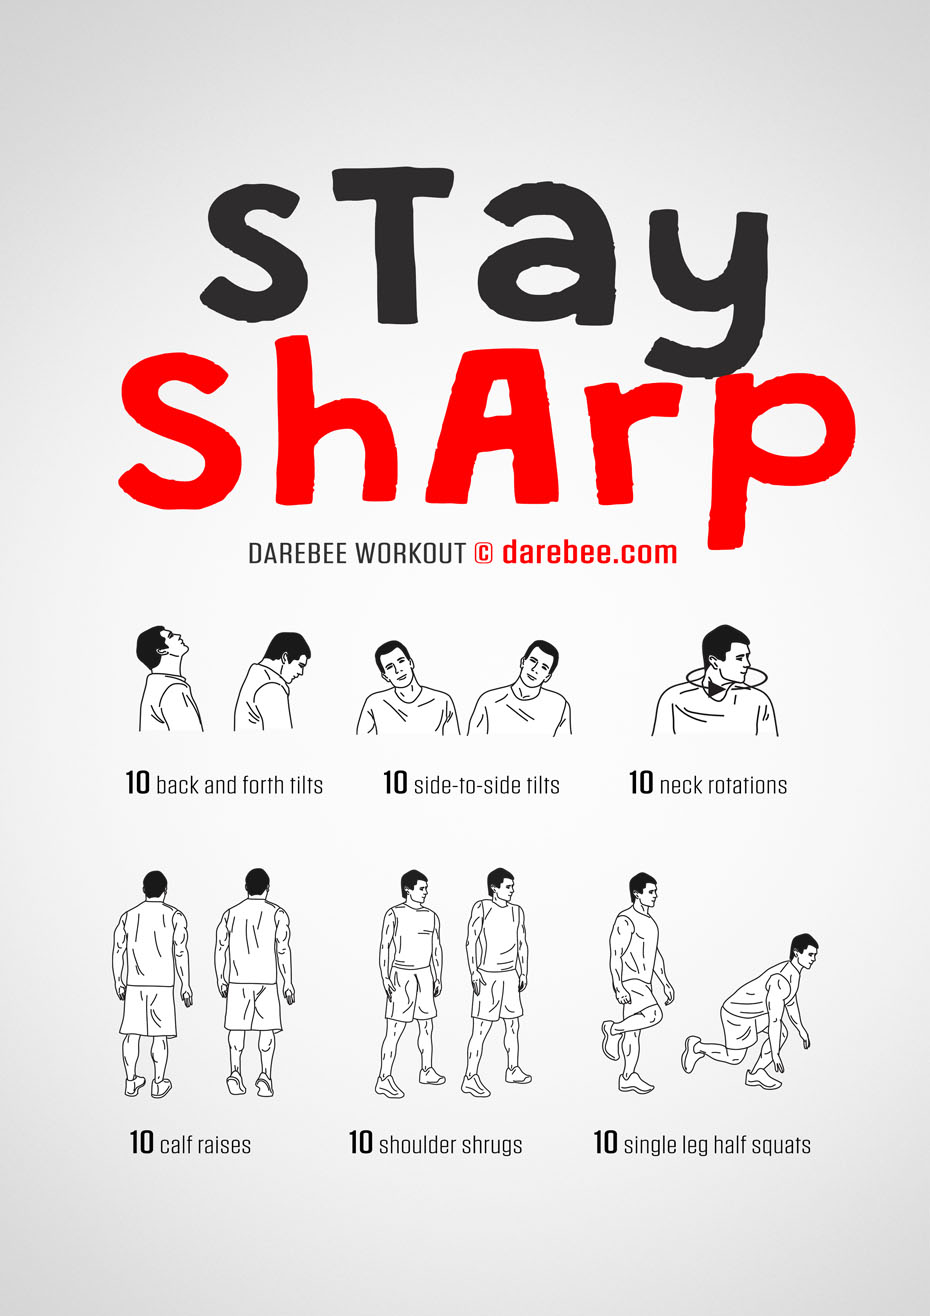 Stay Sharp is a Darebee home fitness workout designed to release the tension of the day and get your blood pumping through your body, helping you stay alert.